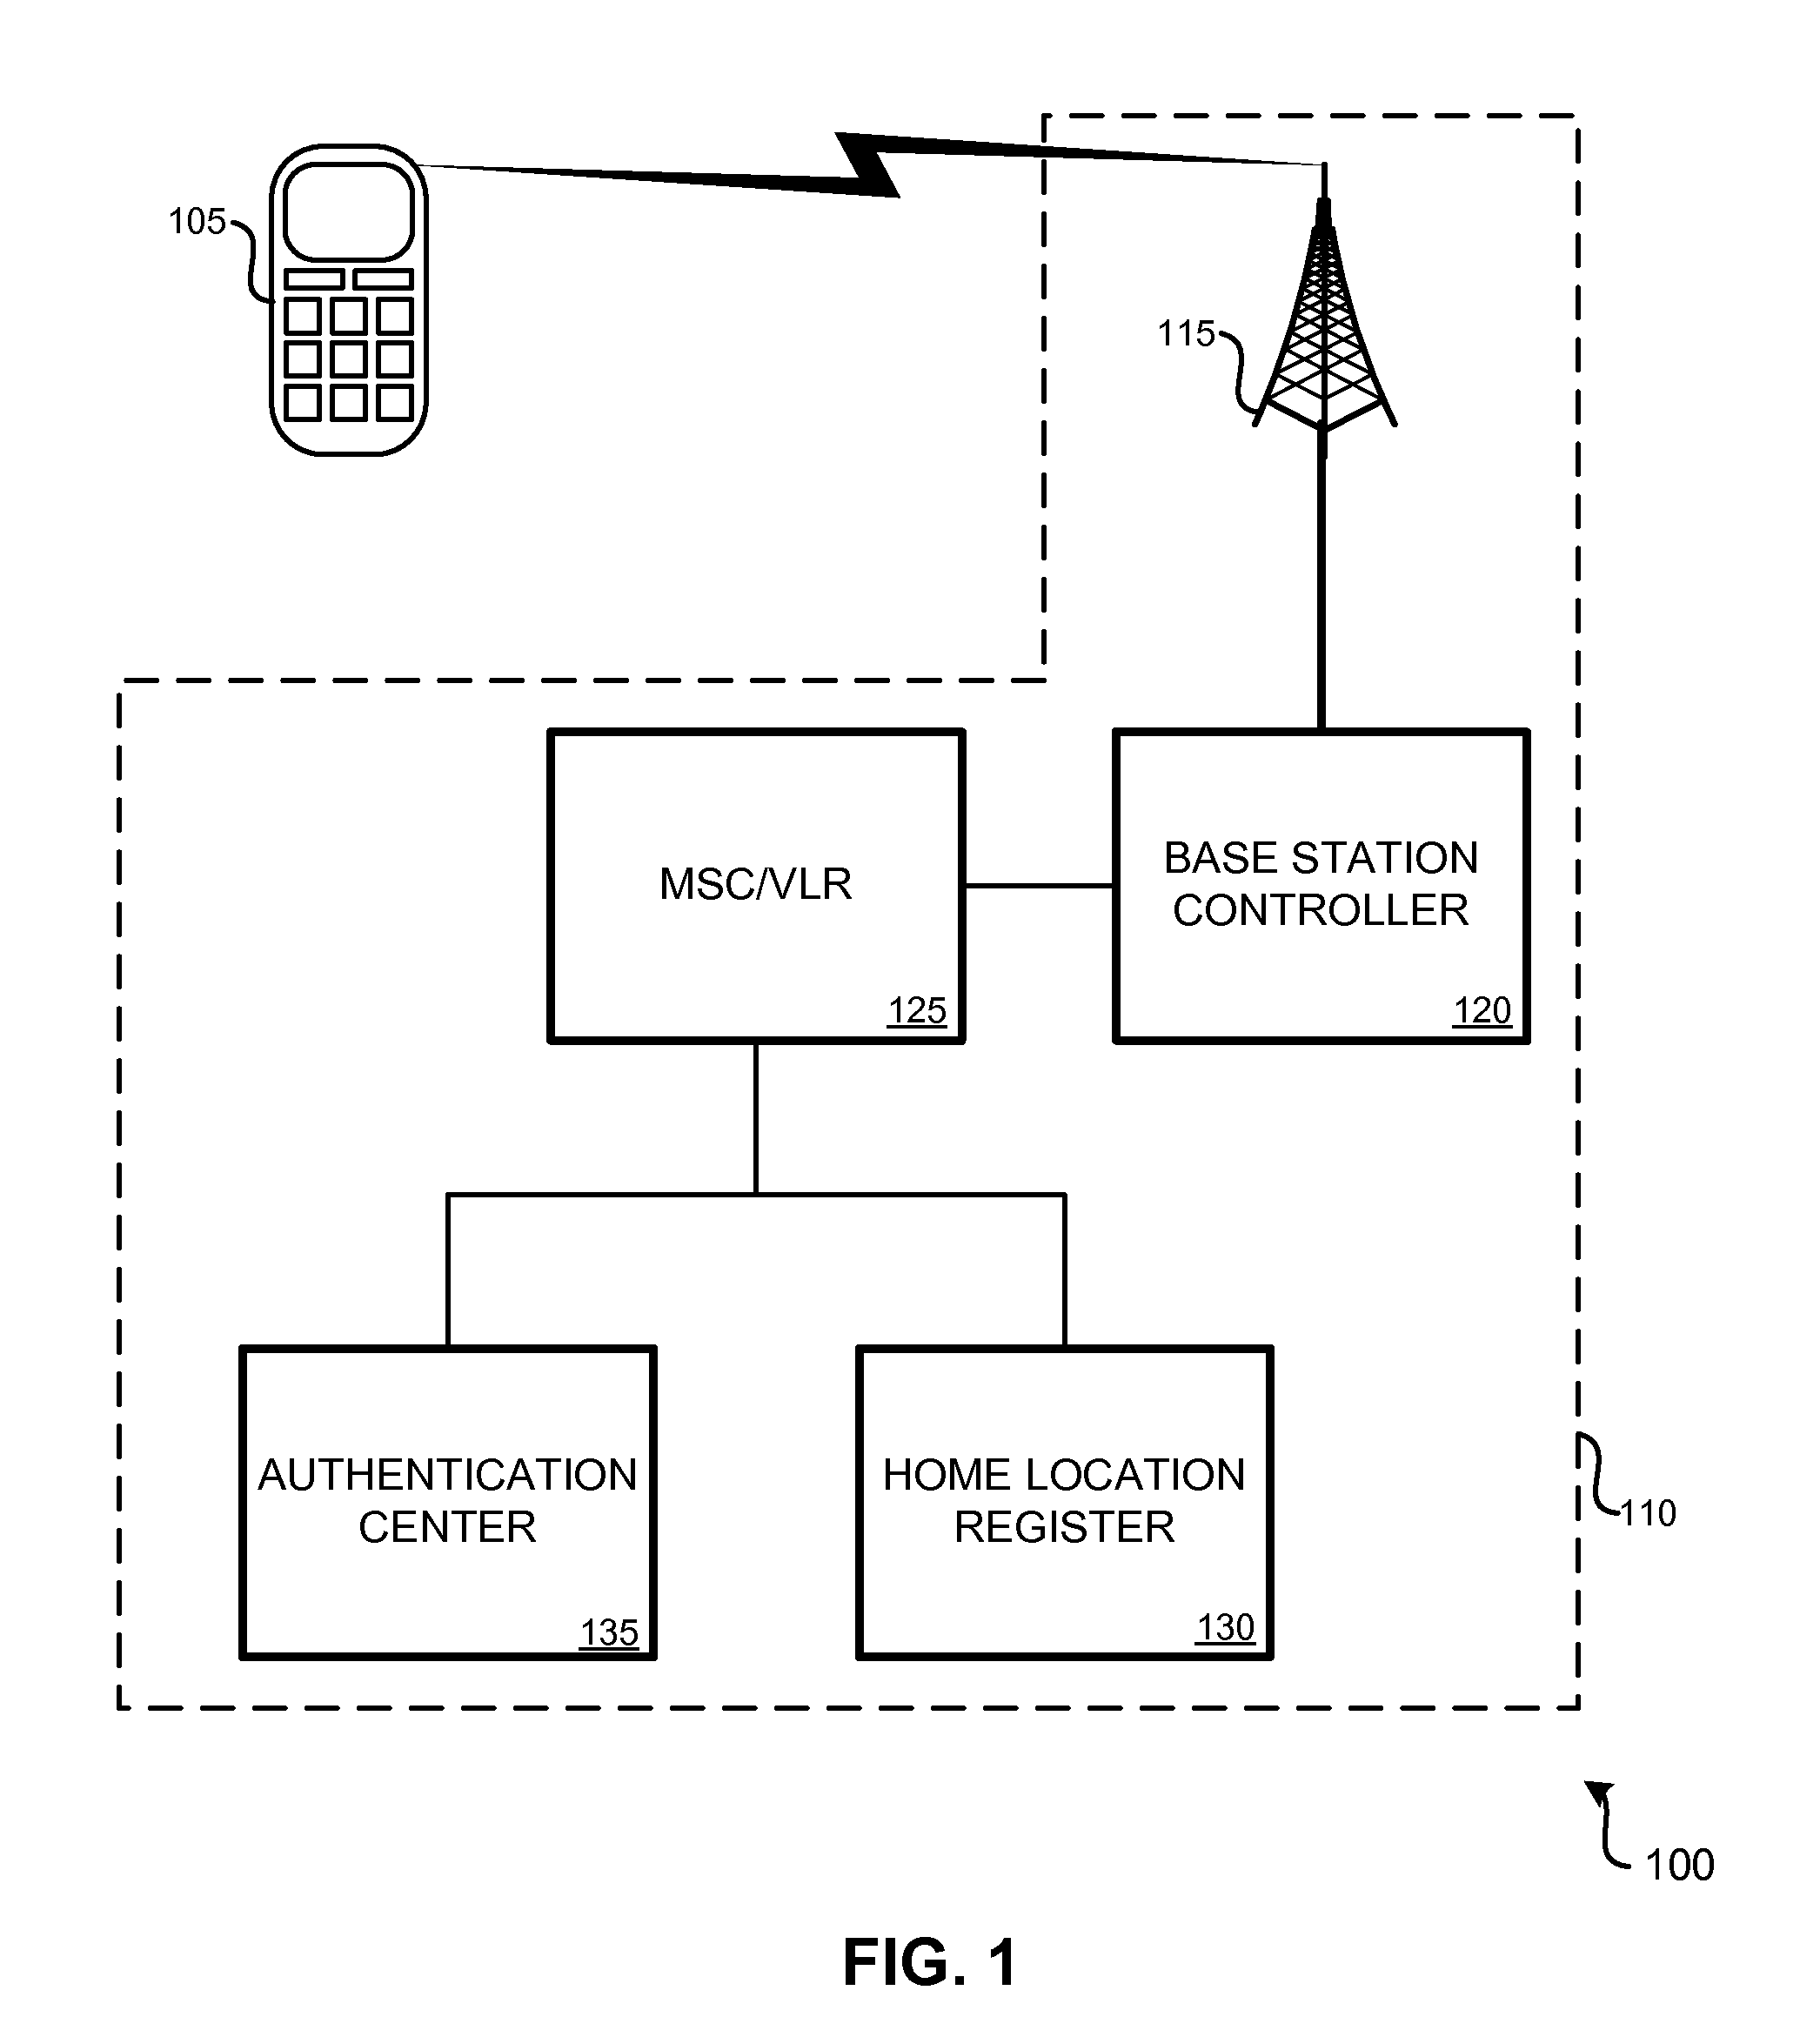 Extended wireless device activation